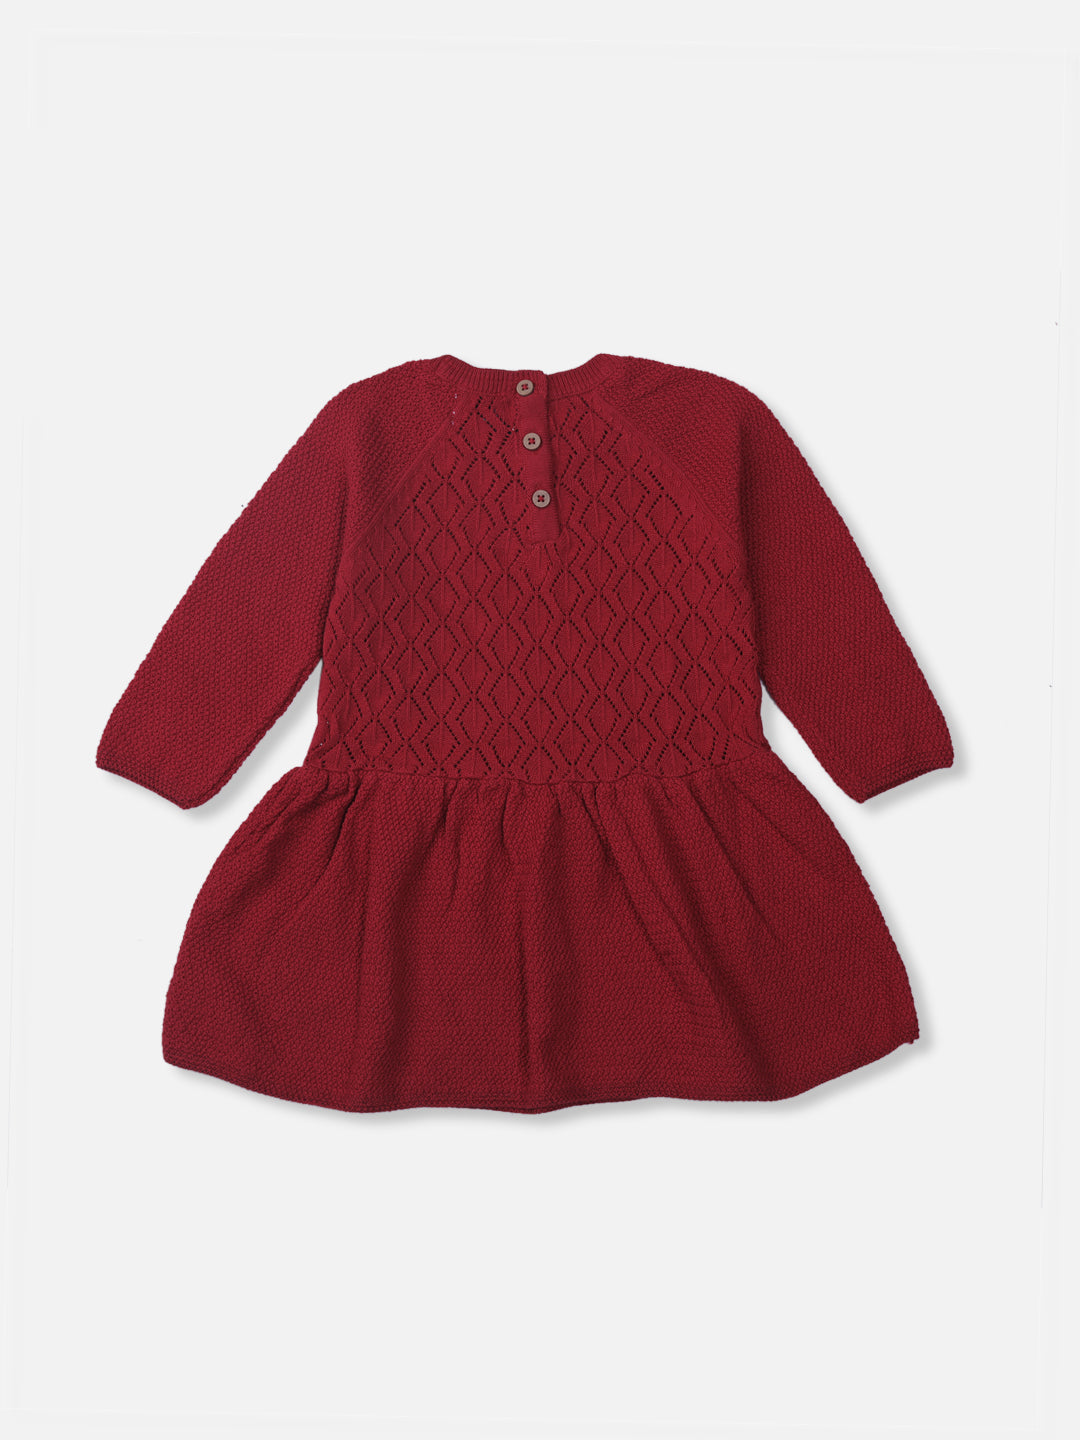 Gj Baby Girls Red Cotton Solid Full Sleeves Dress